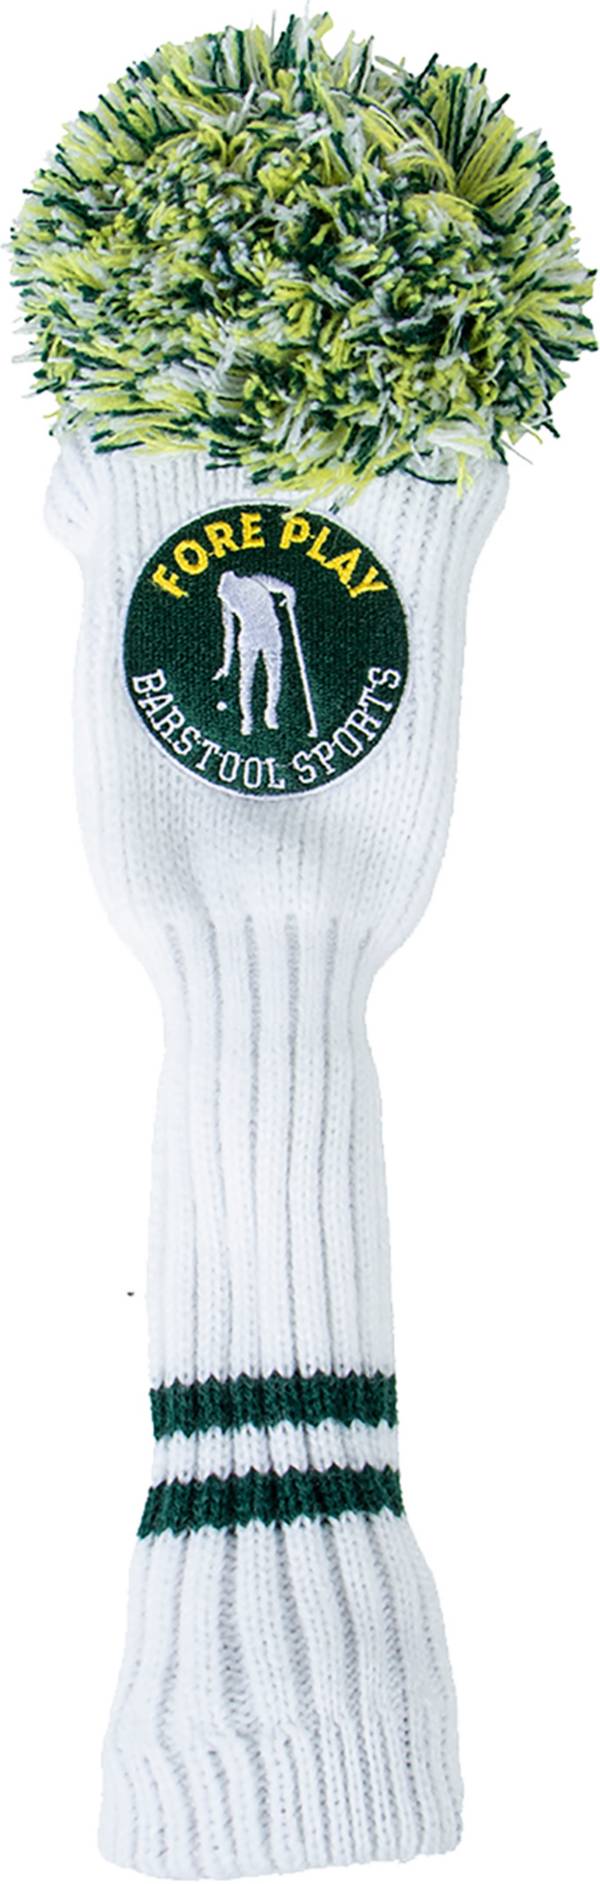 Barstool Sports Fore Play Knit Hybrid Headcover product image